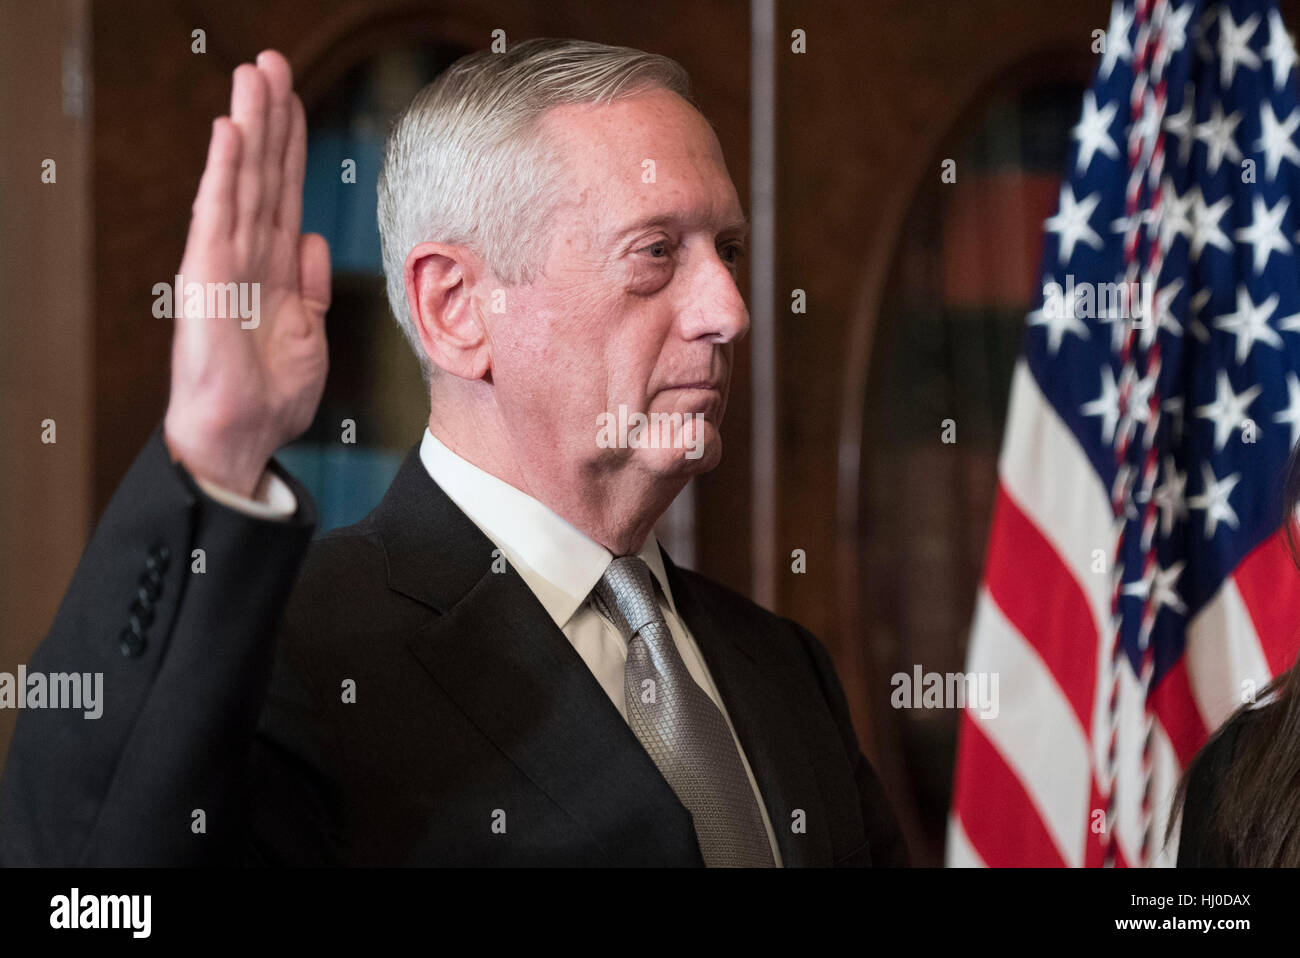 Washington, USA. 20th January, 2017. Marine Corps General James Mattis is sworn-in as Defense Secretary by Vice President Mike Pence (not pictures), in the Vice Presidential ceremonial office in the Executive Office Building in Washington, DC on January 20, 2017. Photo by Kevin Dietsch/UPI /CNP/MediaPunch Credit: MediaPunch Inc/Alamy Live News Stock Photo